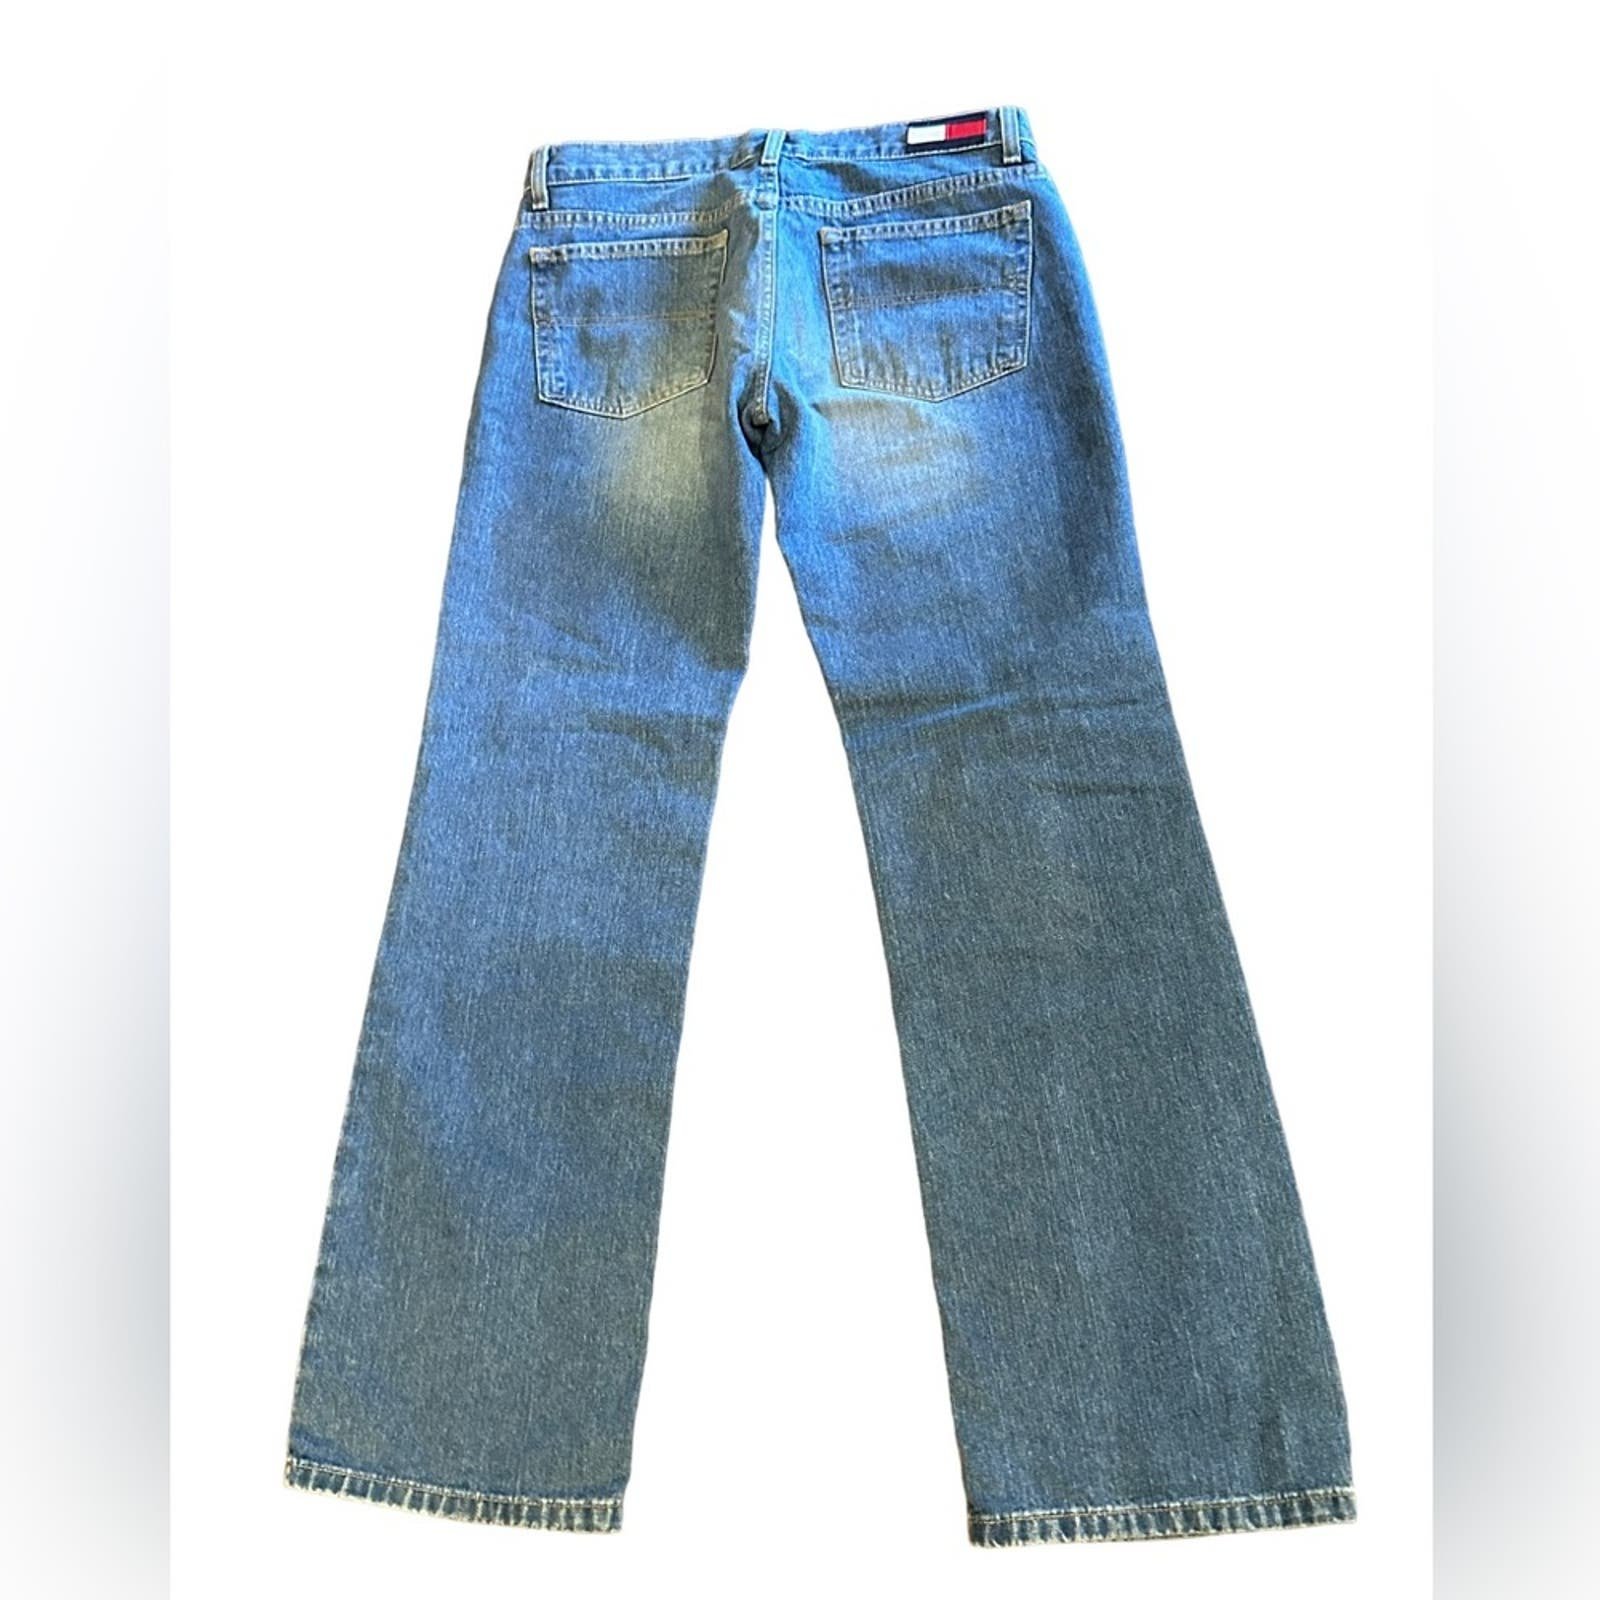 Personality Tommy Hilfiger Classic Straight Jeans 30 x 30 in 100% Cotton fqQZEhYop US Outlet